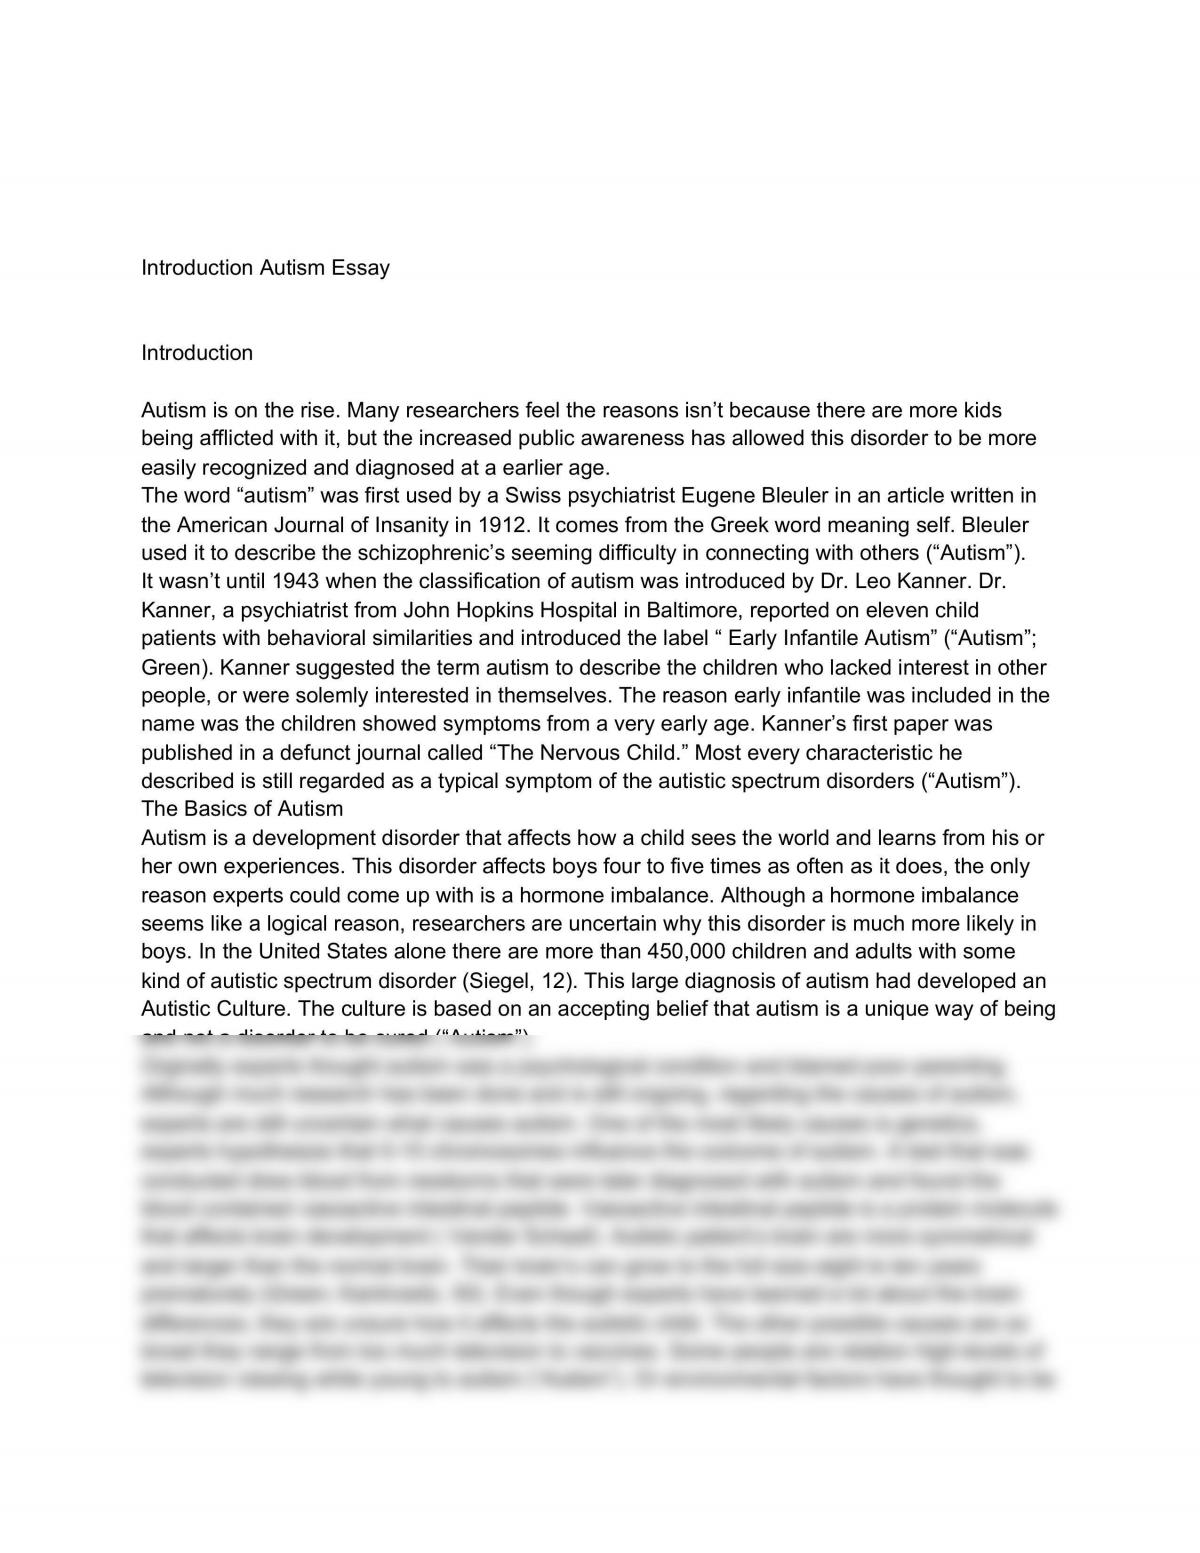 Introduction Autism Essay - Page 1